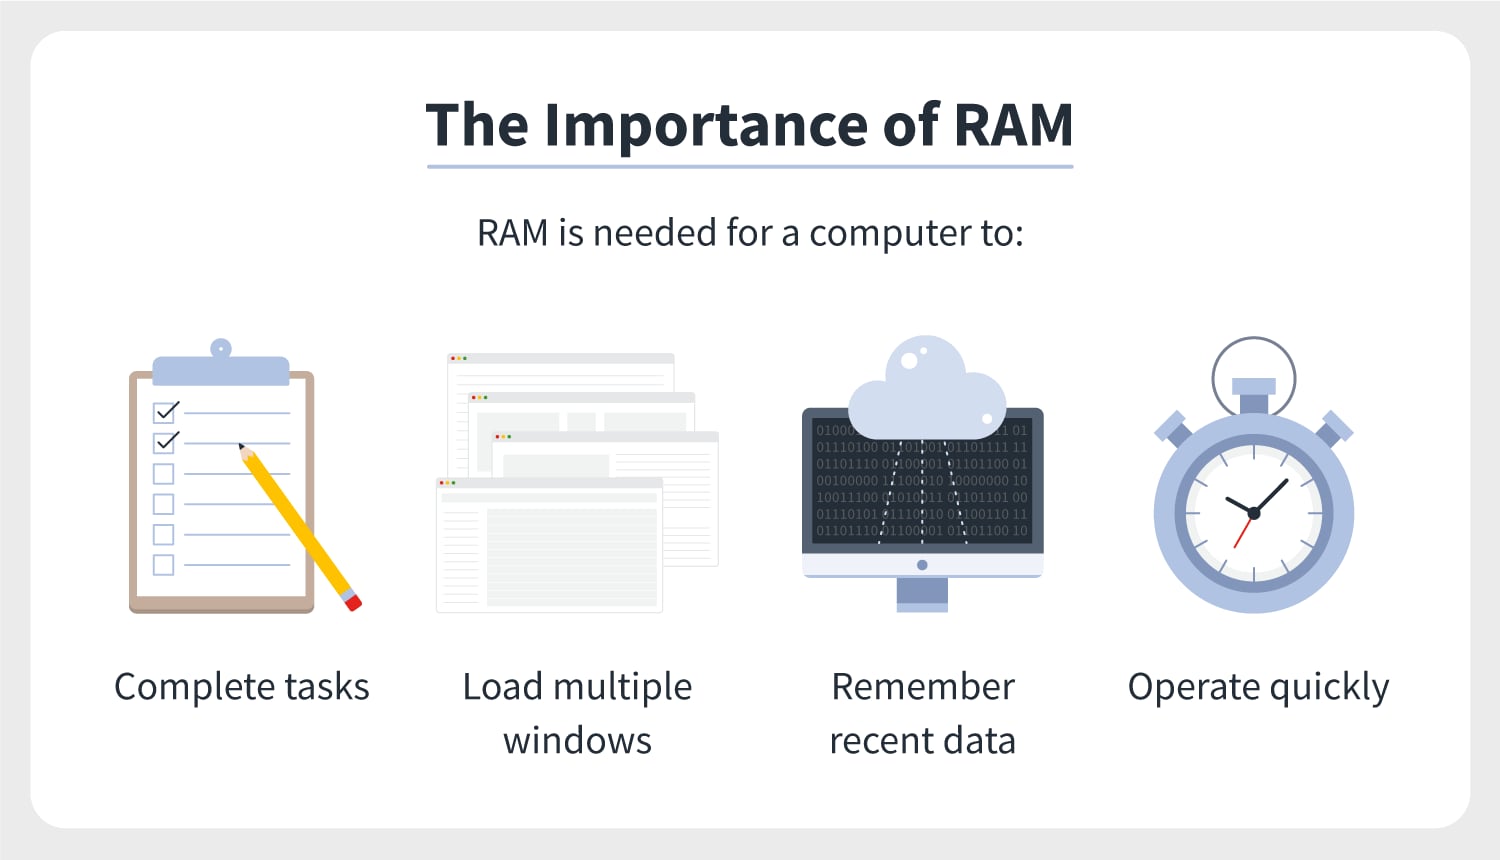 Close unnecessary applications and processes
Increase system RAM